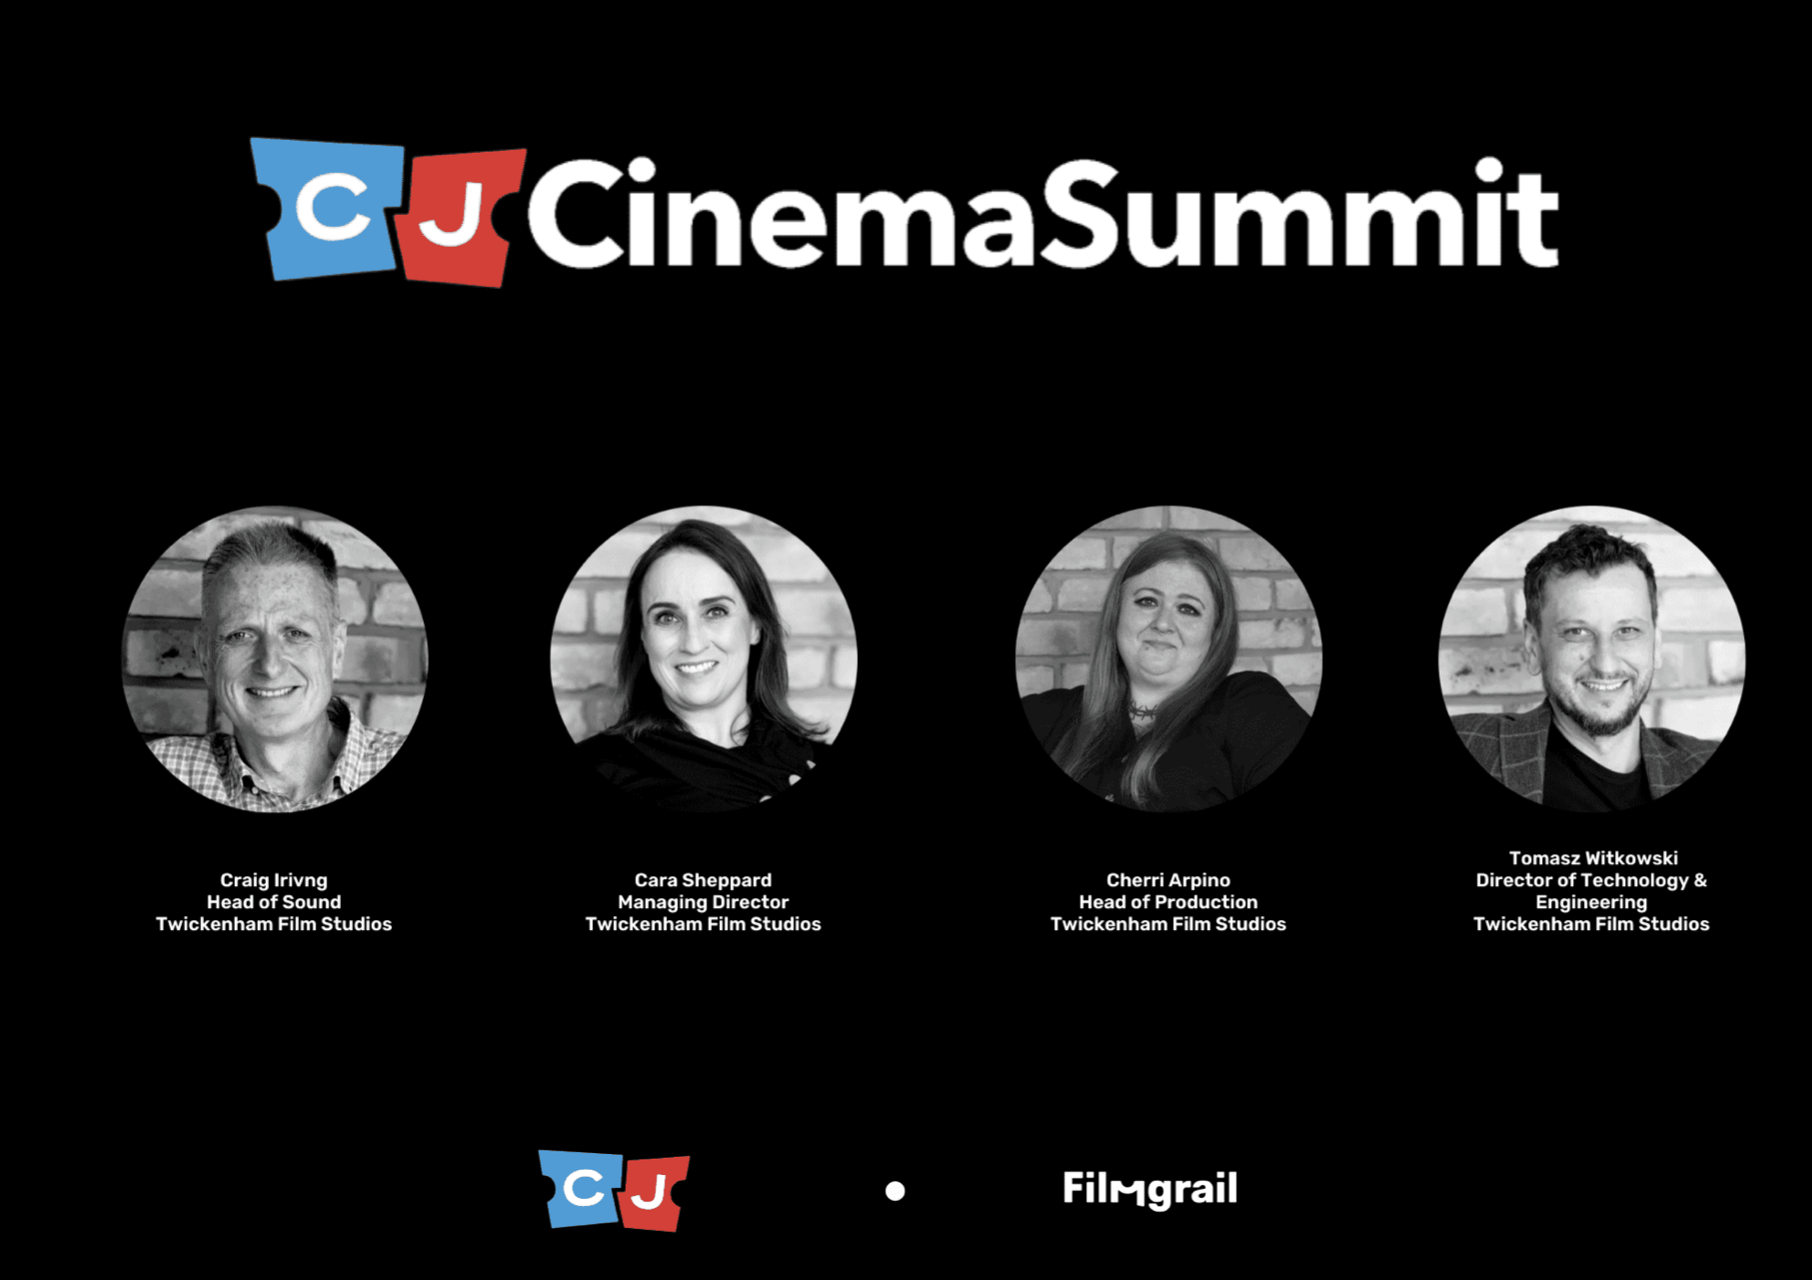 TFS welcomes Celluloid Junkie Cinema Summit on its creative campus